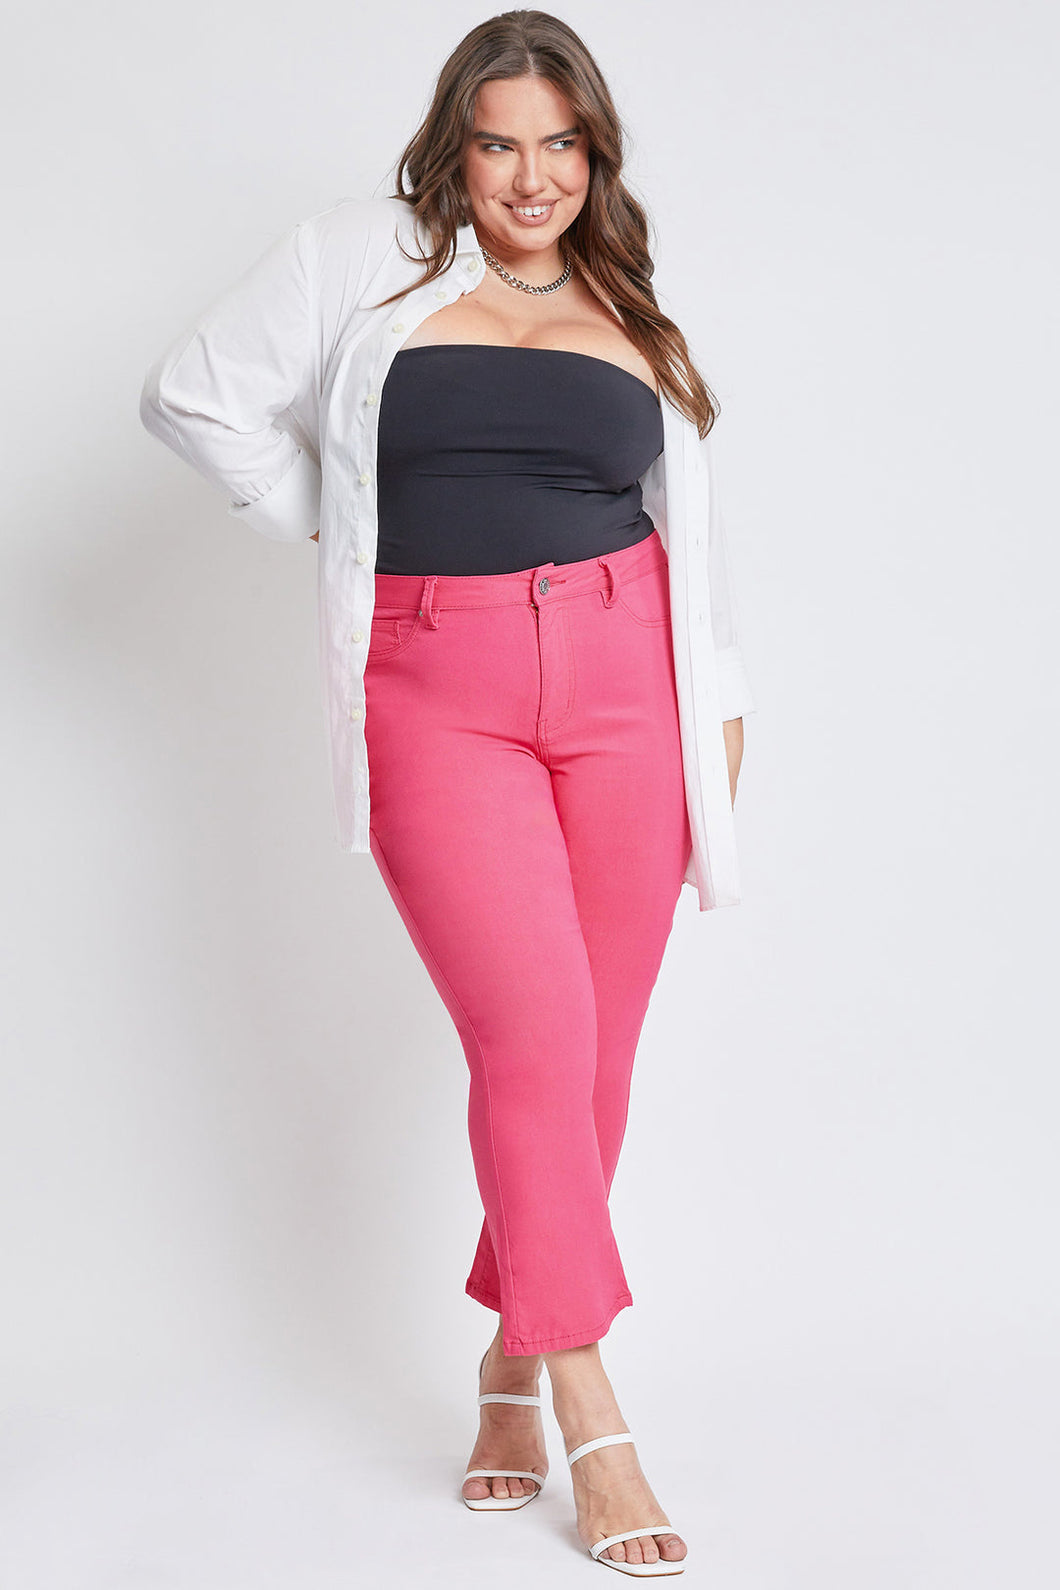 YMI Hyperstretch Cropped Flare